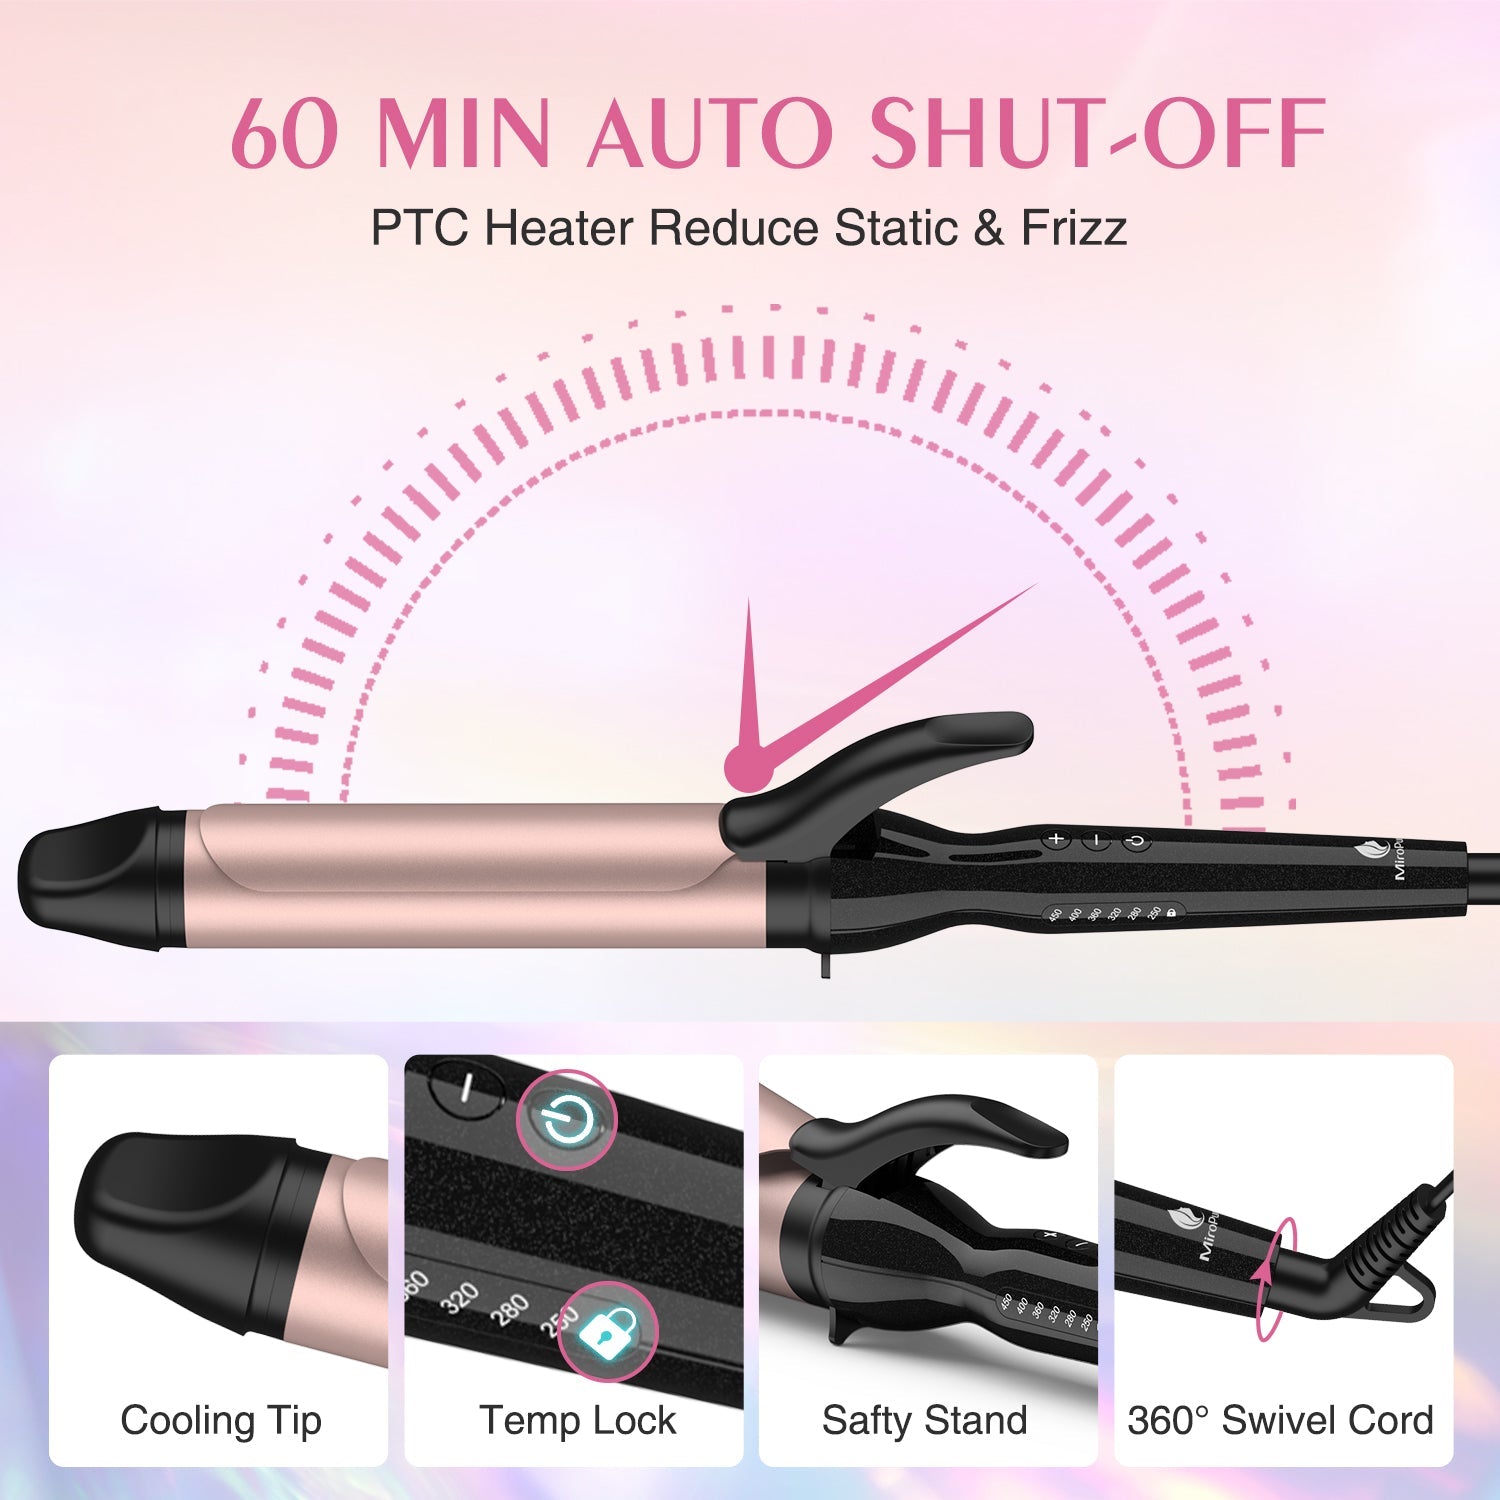 MiroPure Curling Iron, 1 1/2 Inch Hair Curling Iron with Ceramic Coating, Professional Curling Wand, Fast Heating up to 450°F, Wide Voltage for Worldwide, Temperature Lock & 60 Mins Auto Off - Miropure